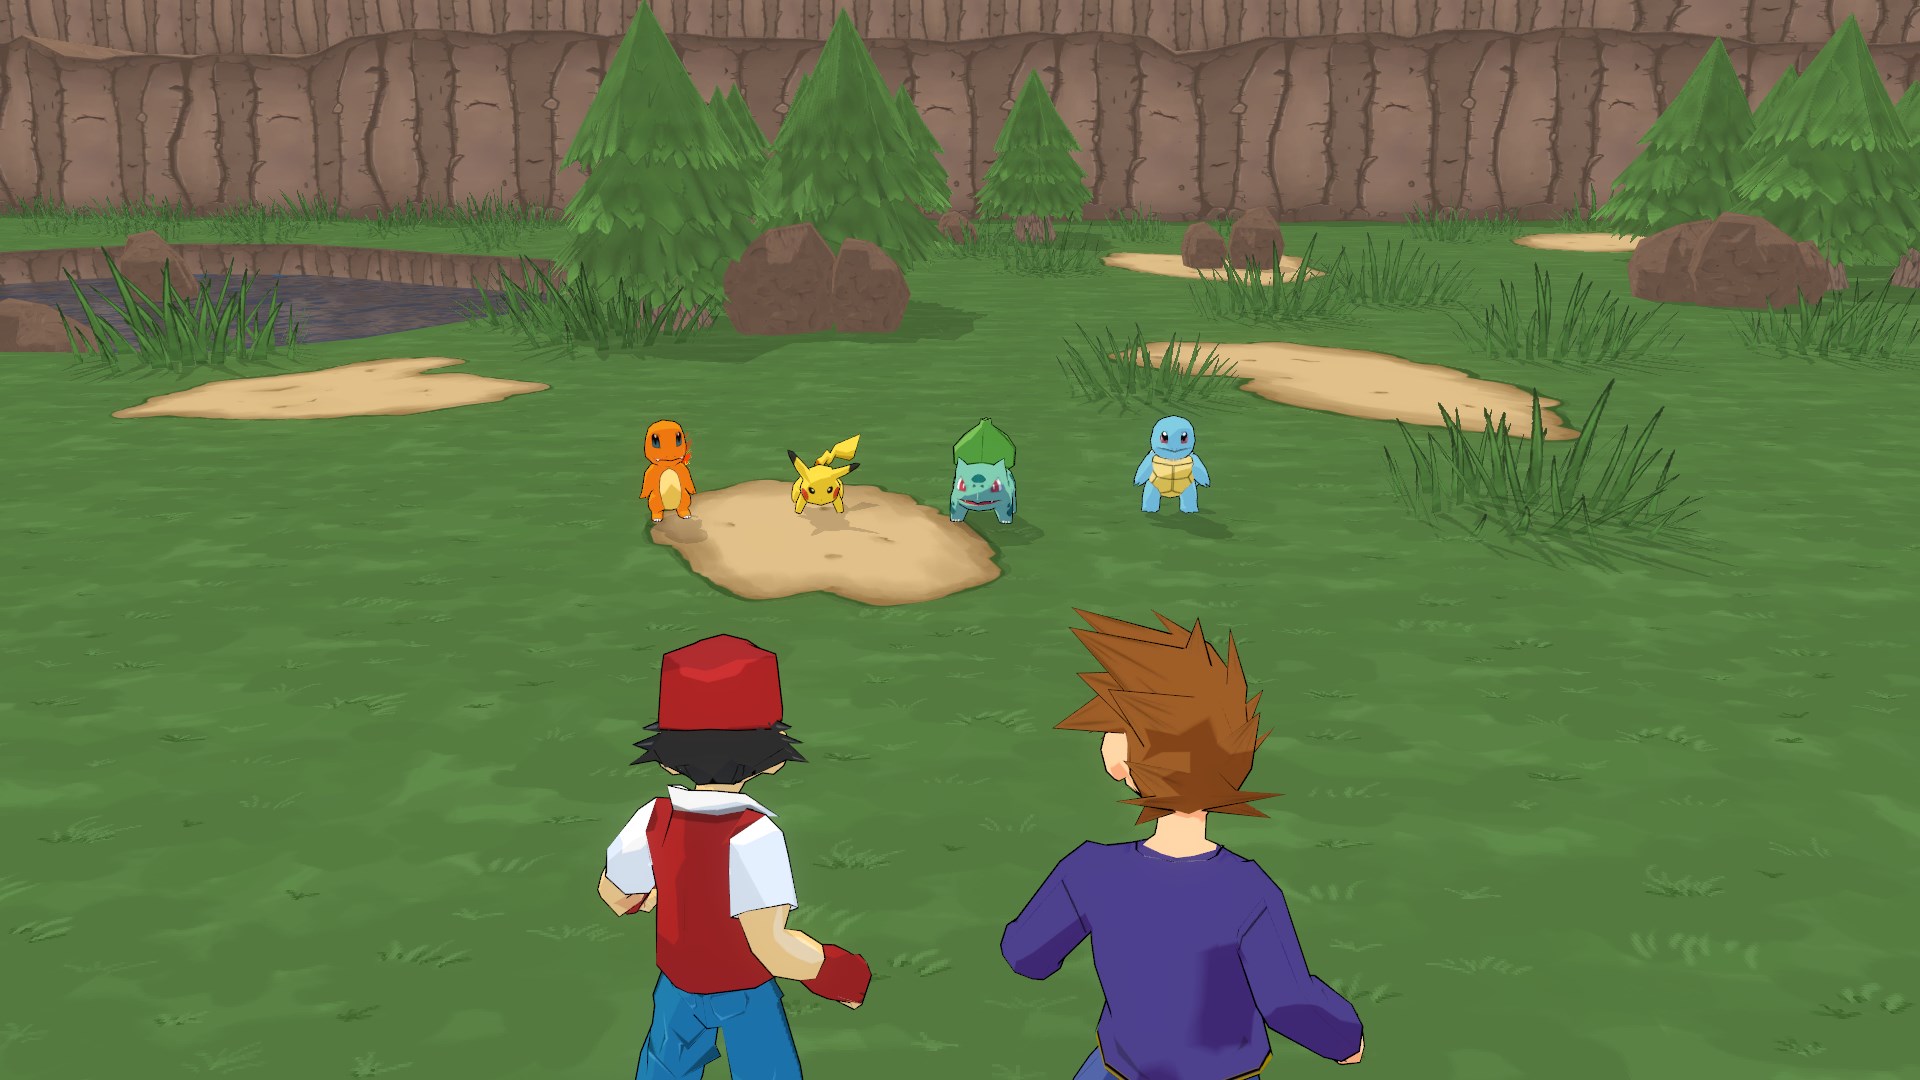 Fan-made "Pokemon Generations" is a 3D action-adventure